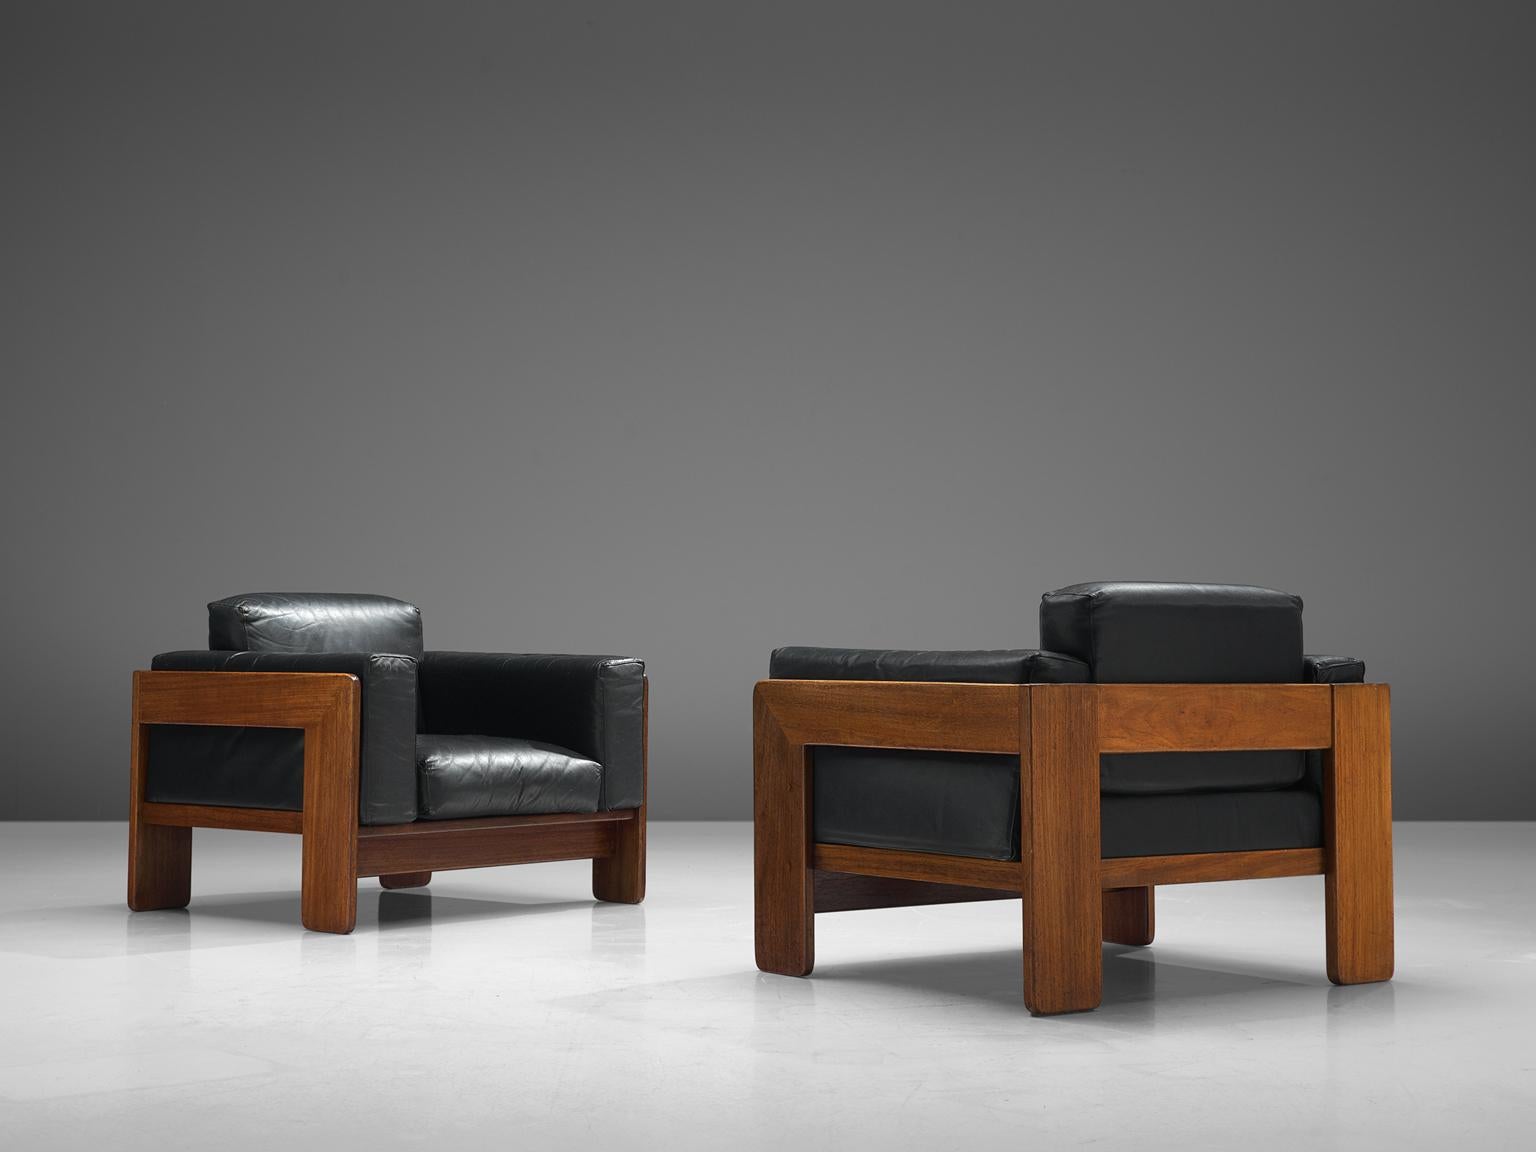 Italian Tobia Scarpa Pair of 'Bastiano' Club Chairs in Walnut and Black Leather